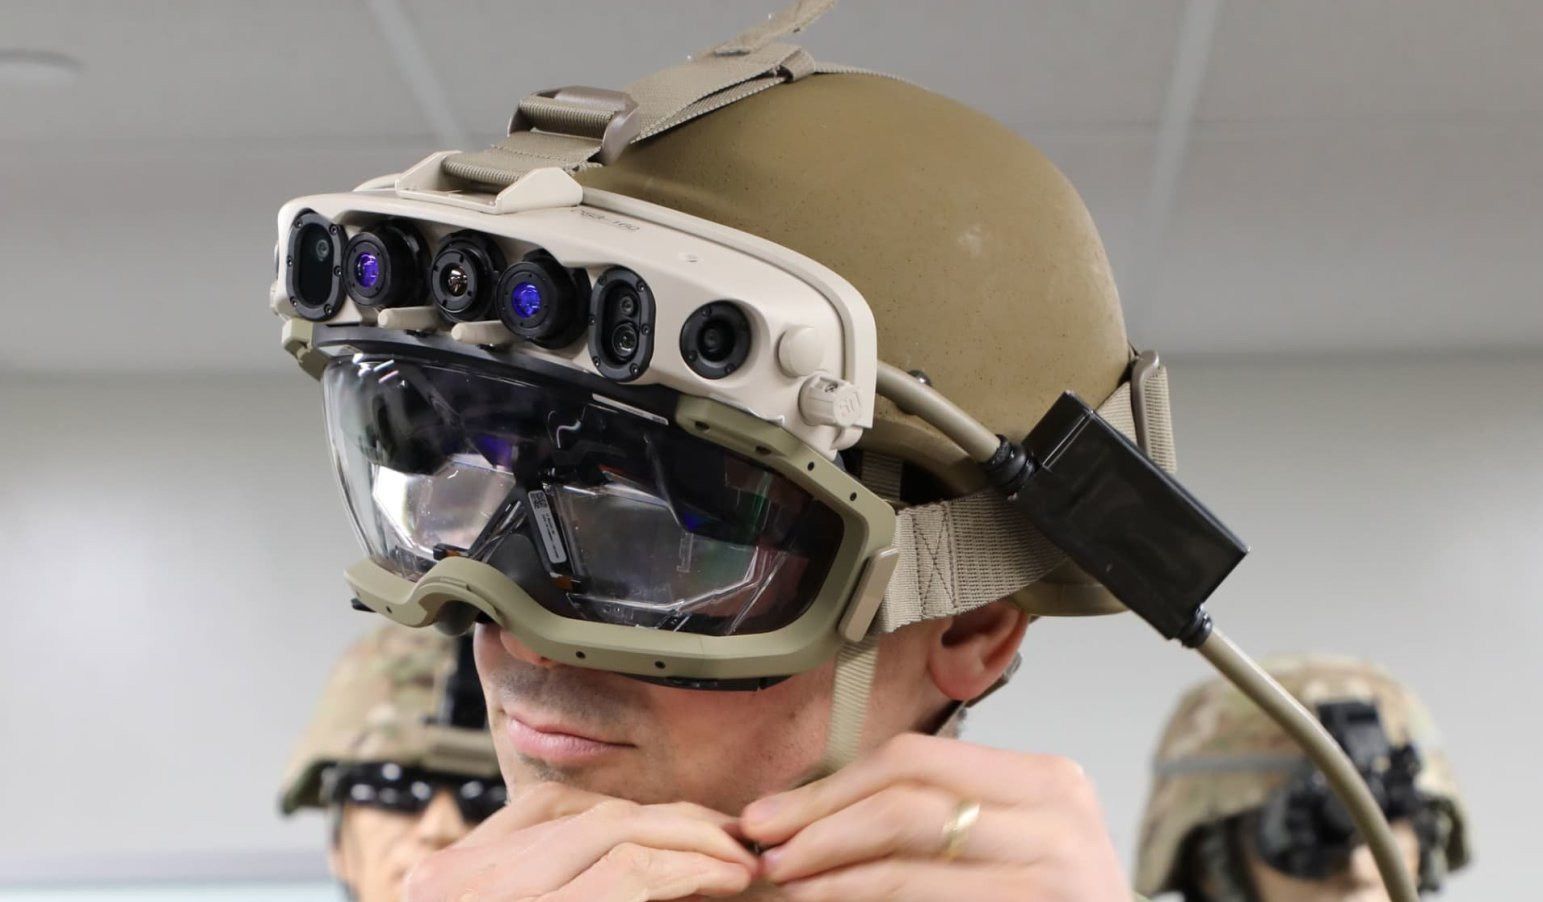 The U.S. army doesn't think VR is ready, either